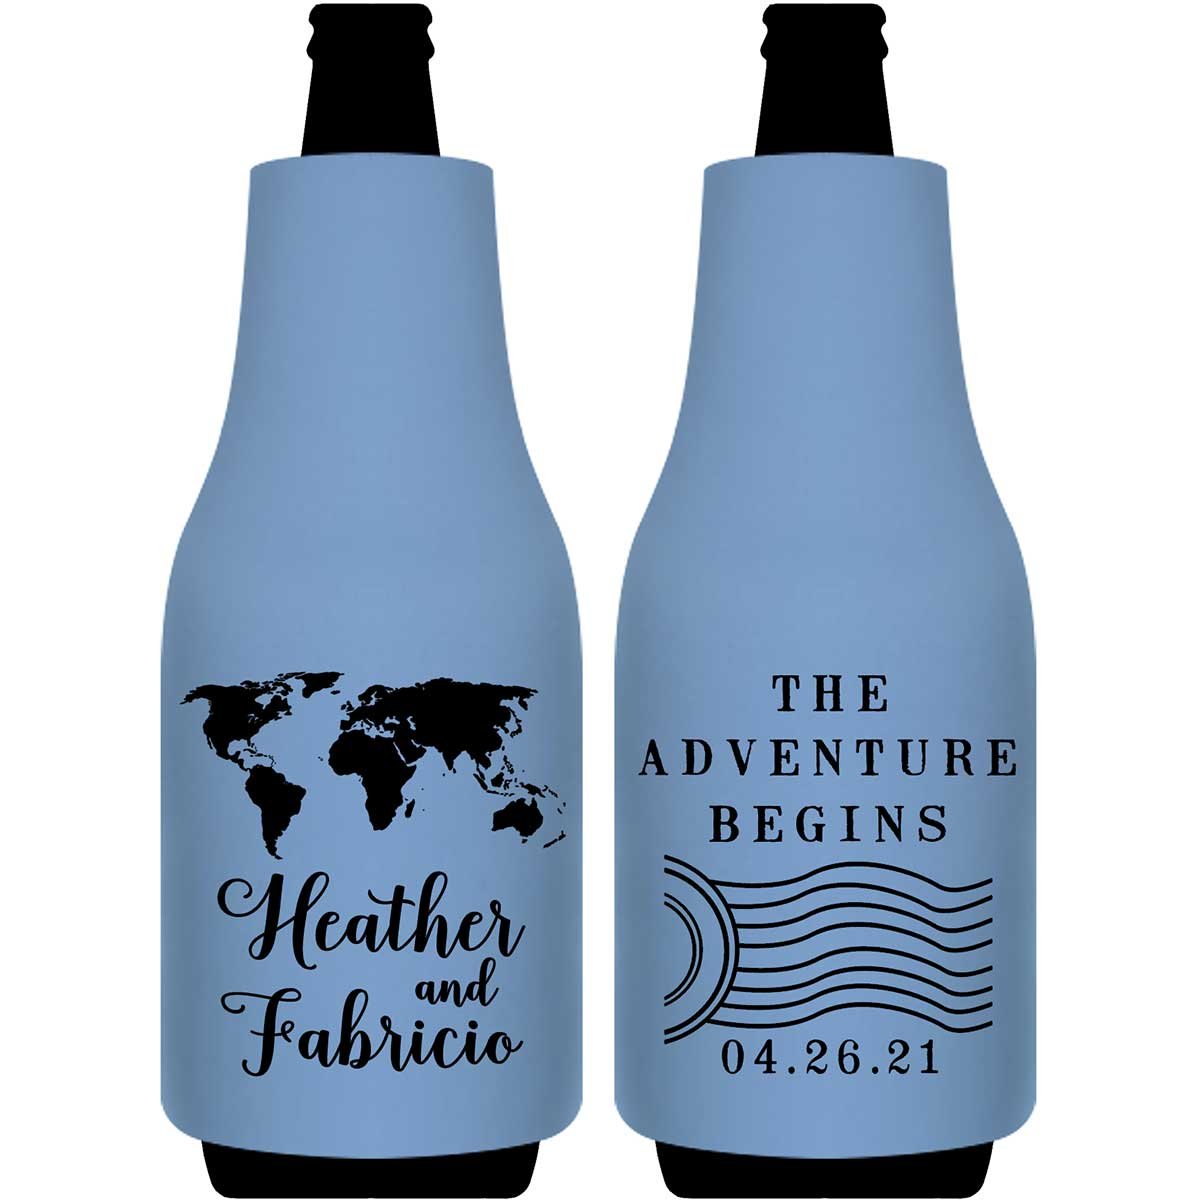 Around The World 1A Foldable Bottle Sleeve Koozies Wedding Gifts for Guests